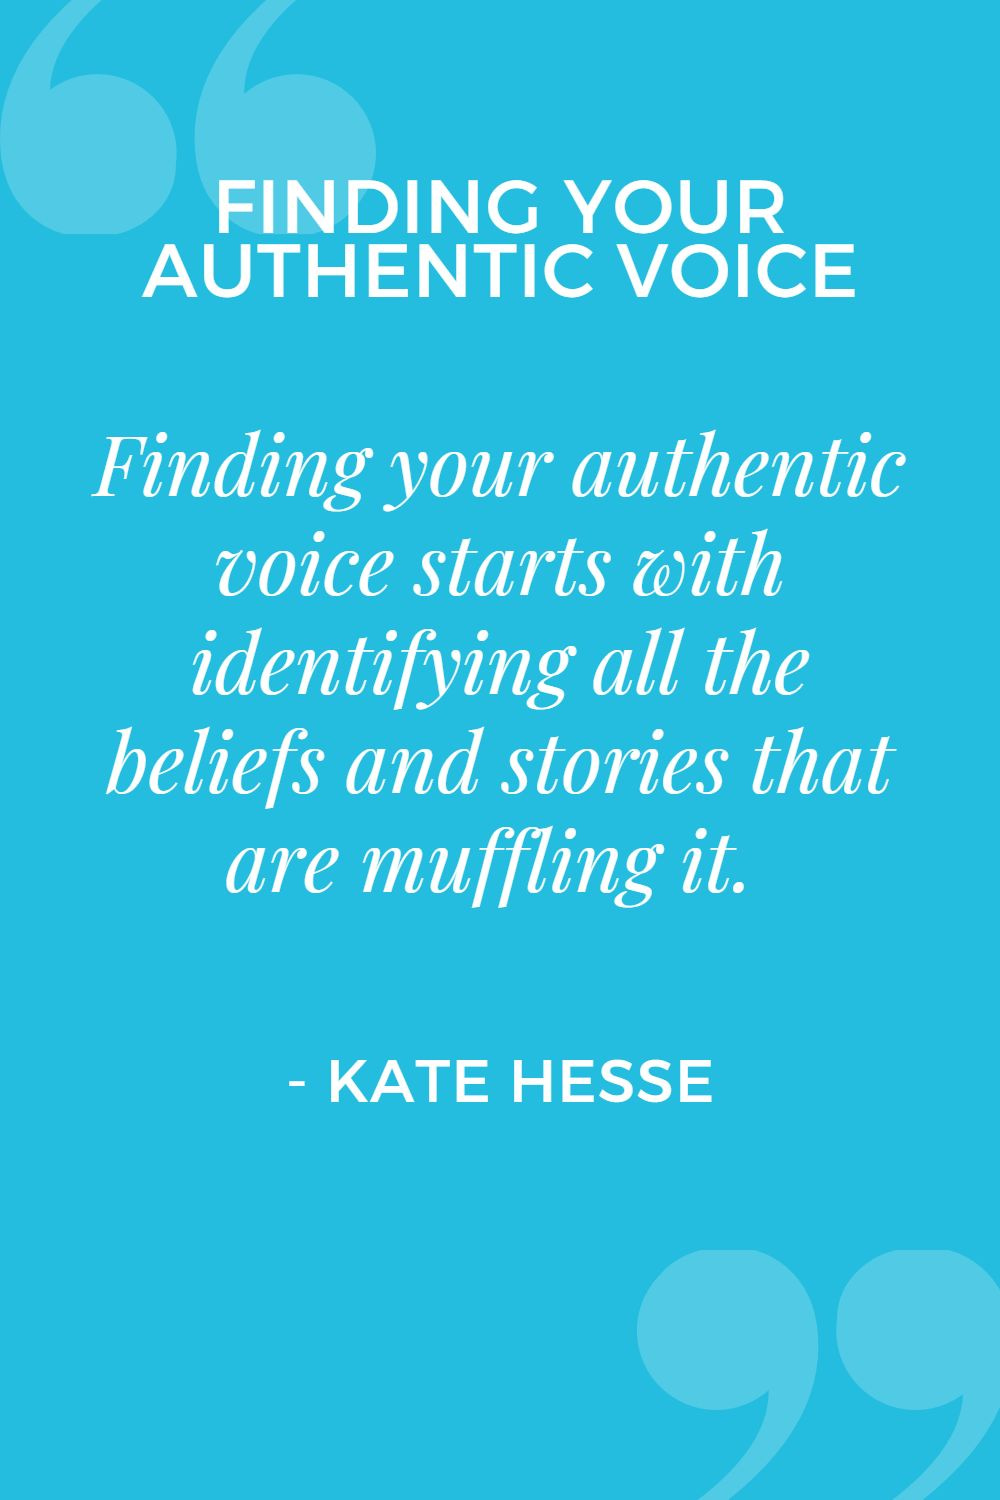 Finding your authentic voice starts with identifying all the beliefs and stories that are muffling it.